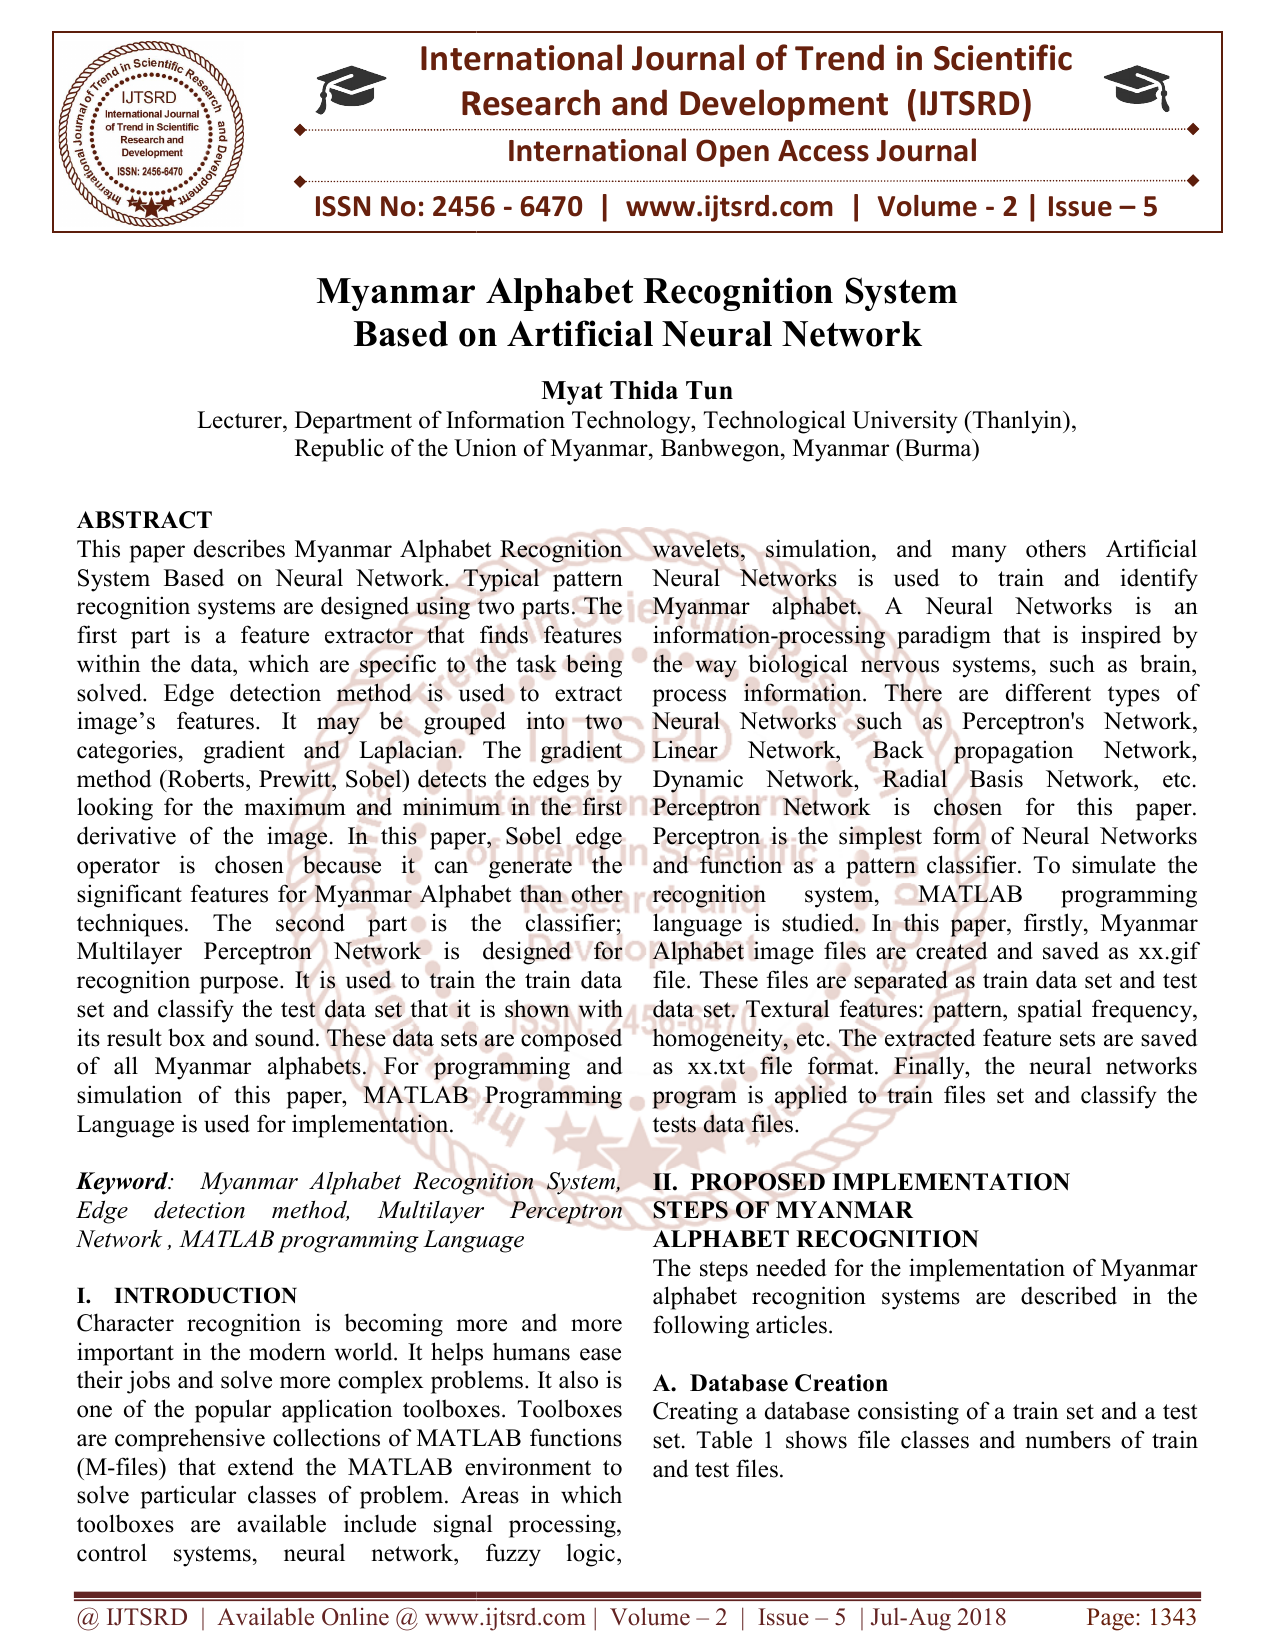 optical character recognition papers for myanmar language